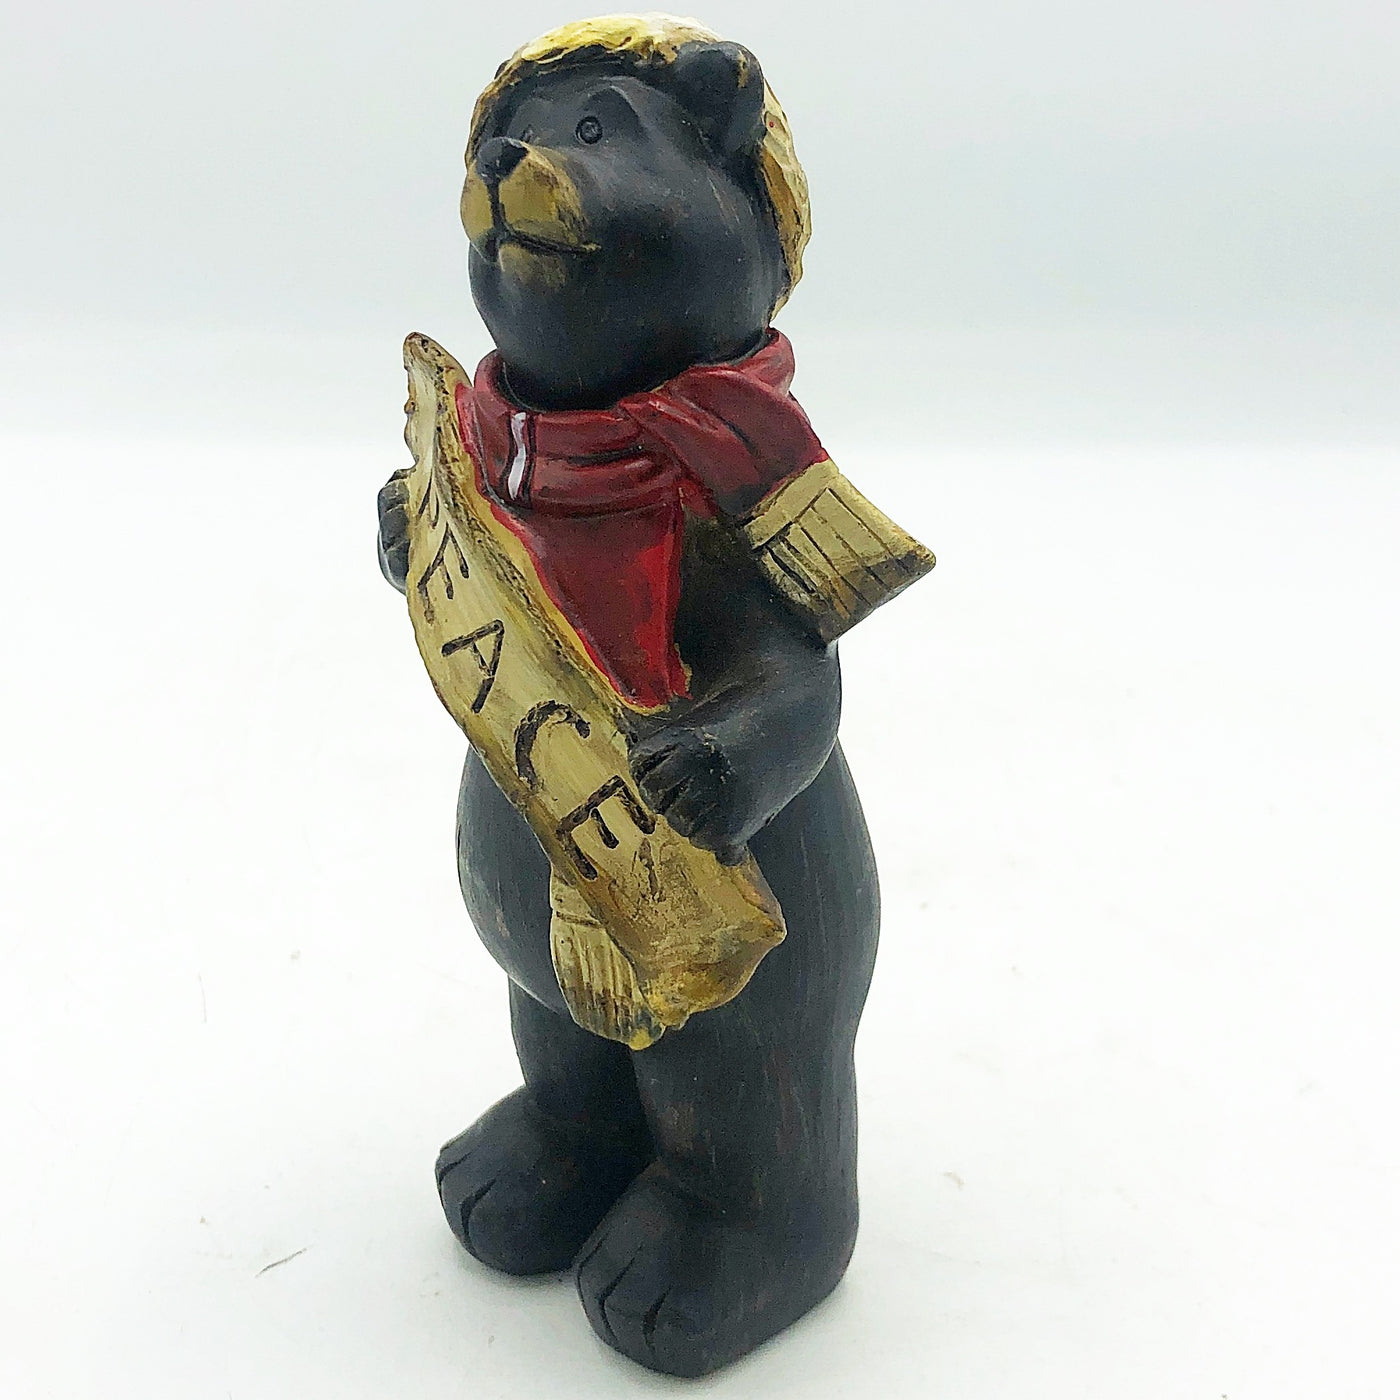 💙 Black Bear with Peace Banner 5.5" Resin Figure